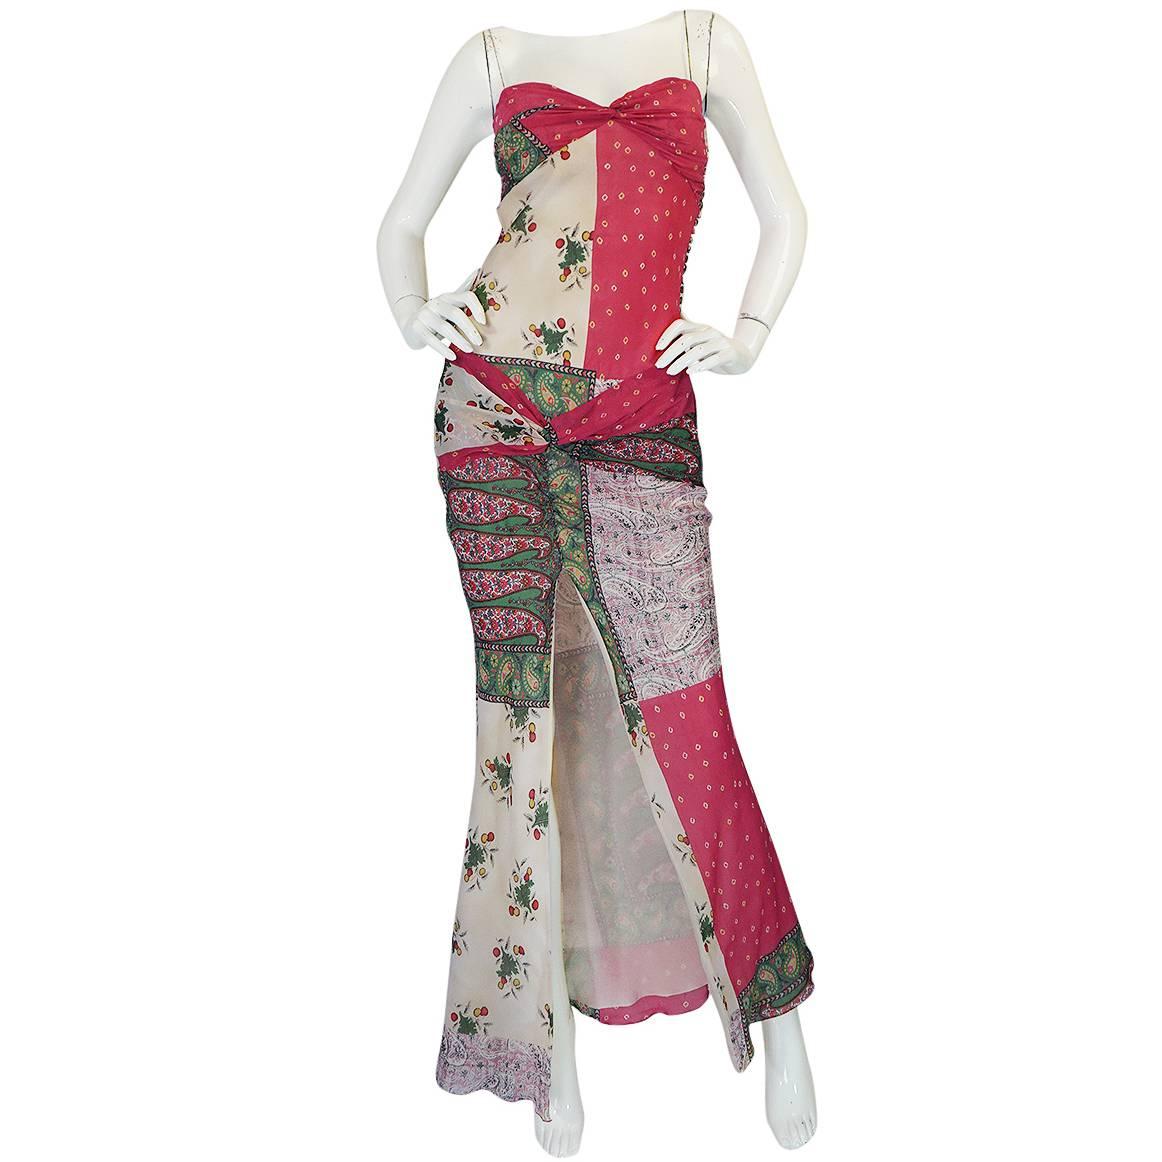 1990s Galliano for Christian Dior Pink Silk "Patchwork" Dress